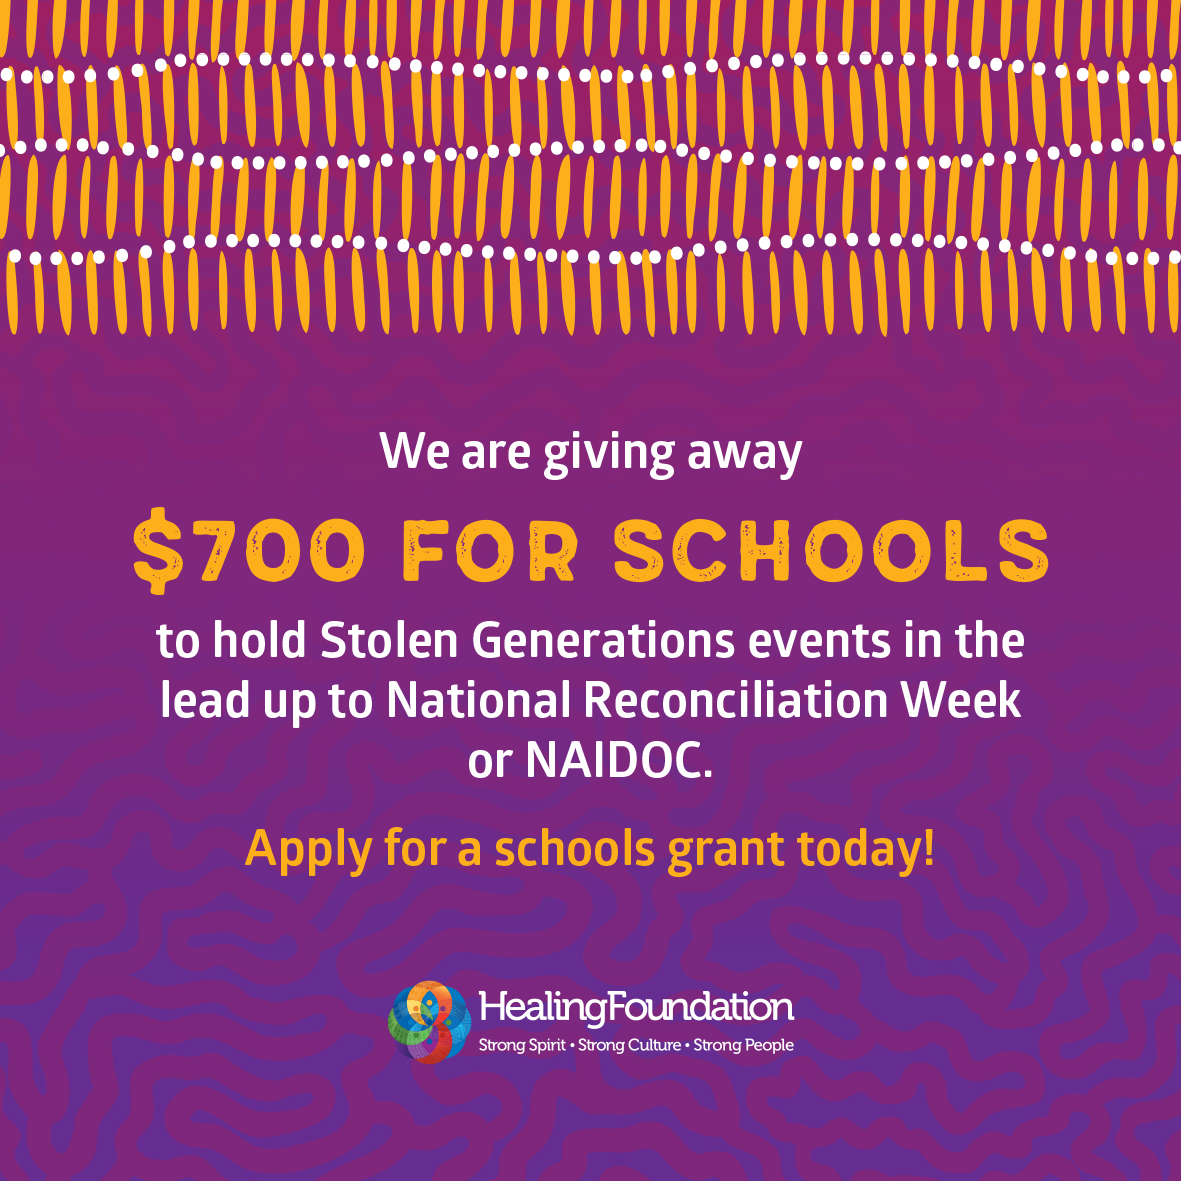 New funding for schools to share Stolen Generations history